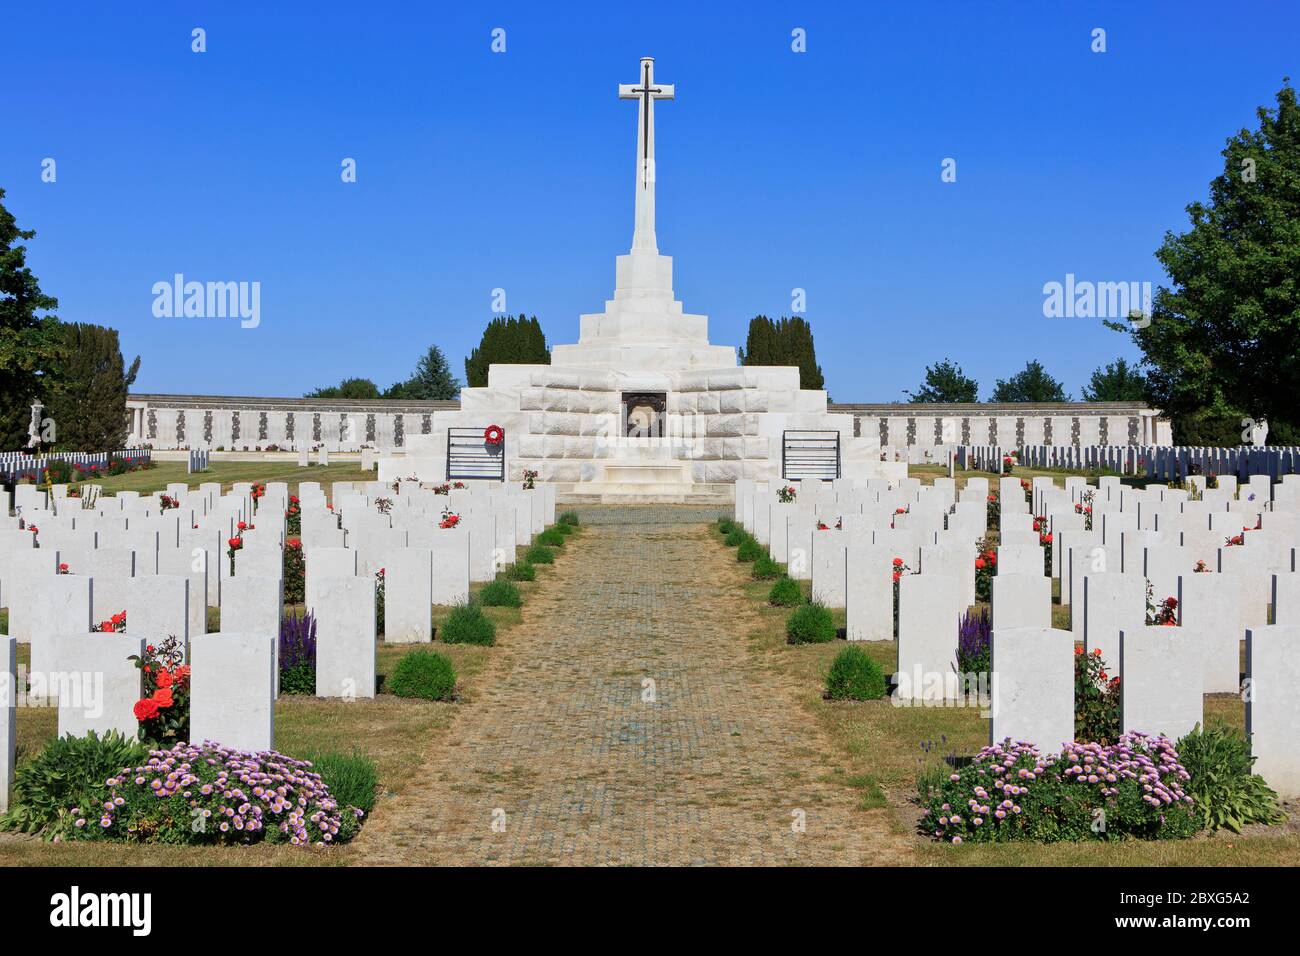 The Cross of Sacrifice built on a German pill box amidst thousands of Commonwealth graves at Tyne Cot Cemetery (1914-1918) in Zonnebeke, Belgium Stock Photo